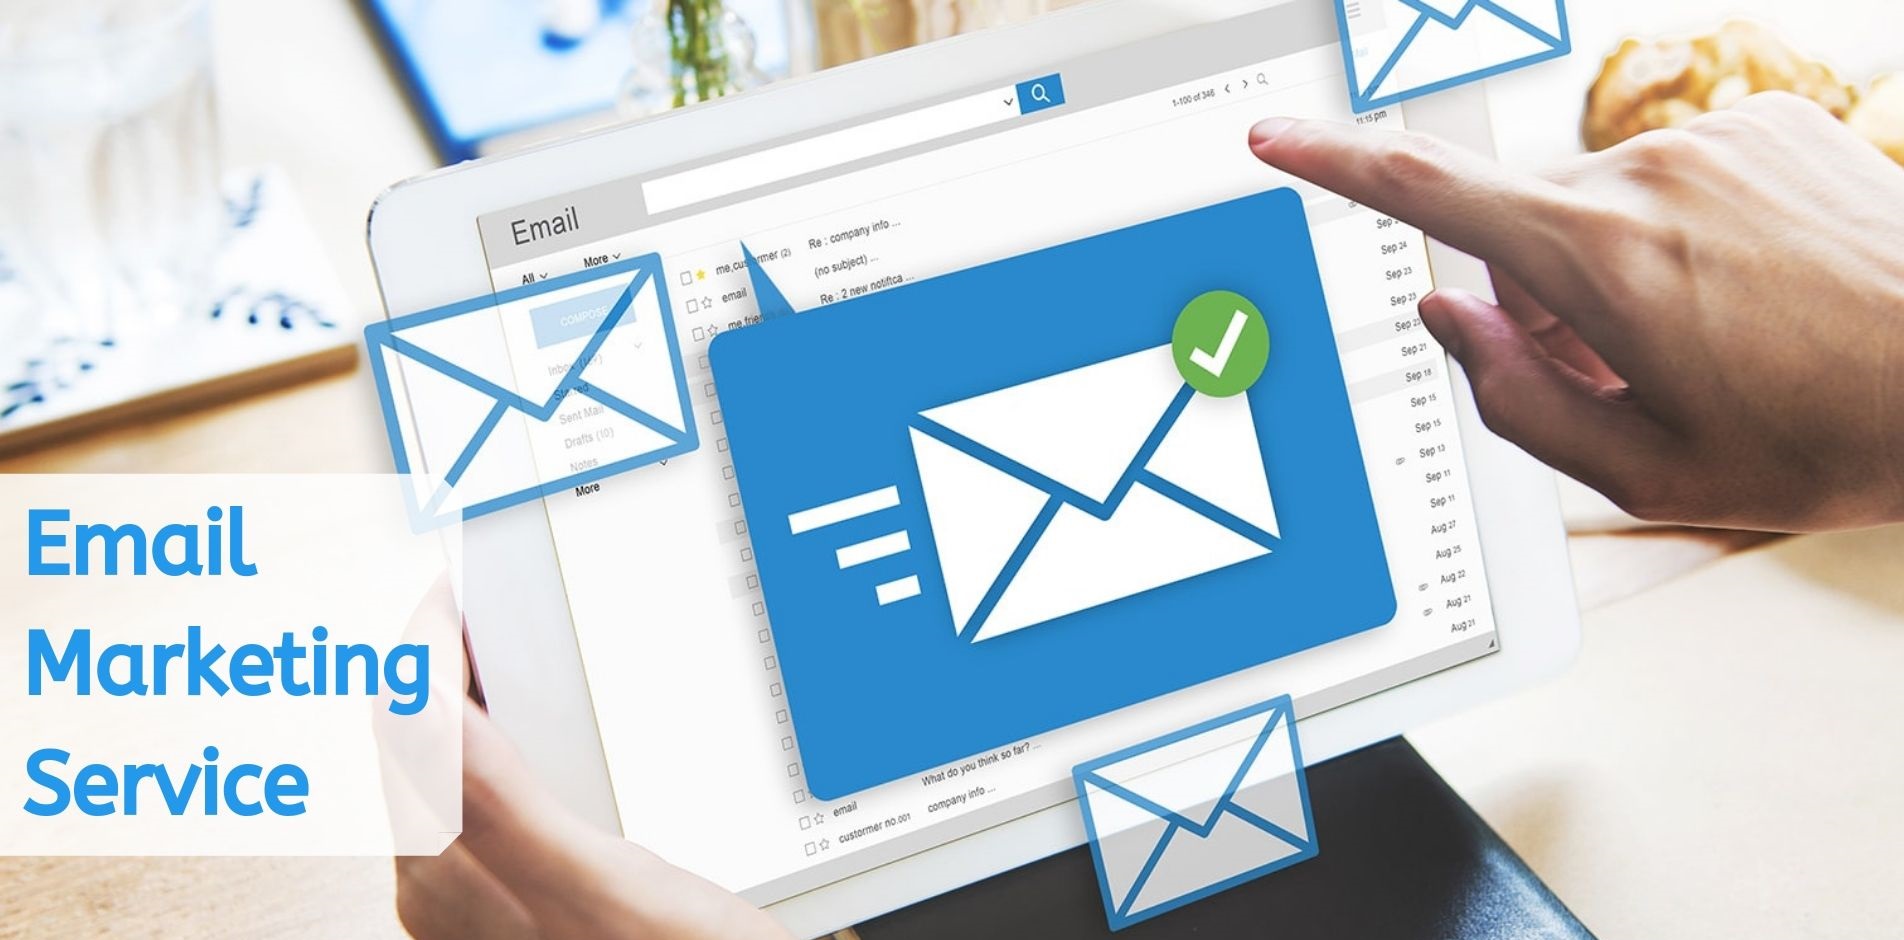 Five Key Things To Look For In Your Email Marketing Service